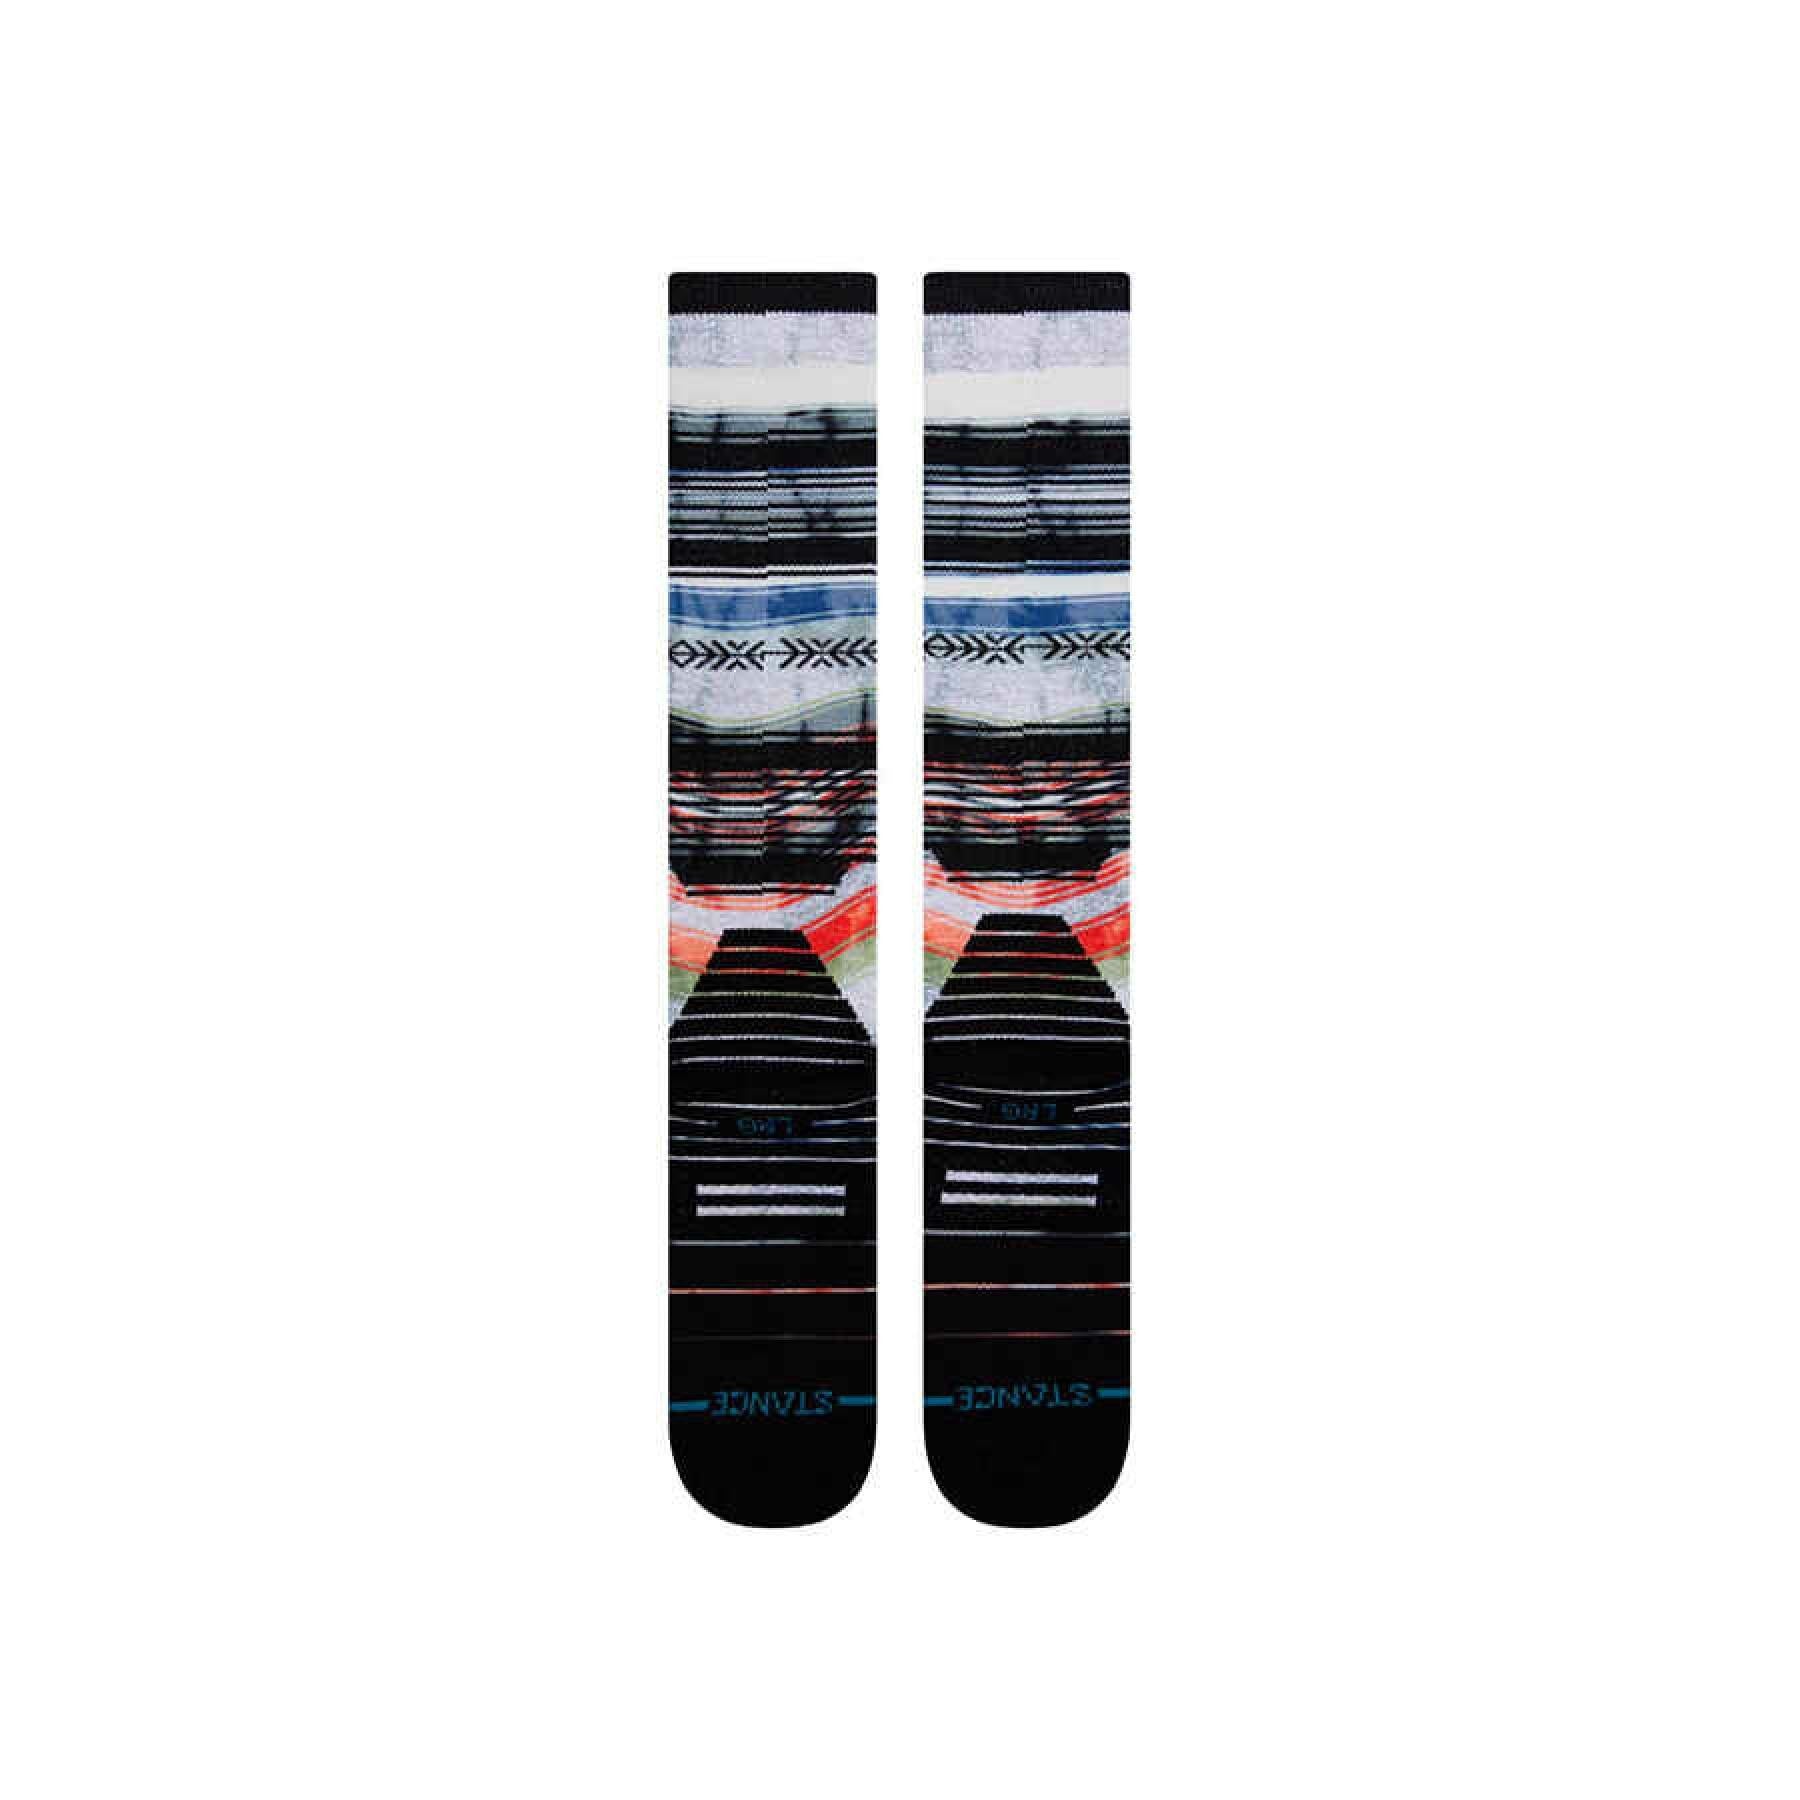 Calcetines Stance Traditions Black